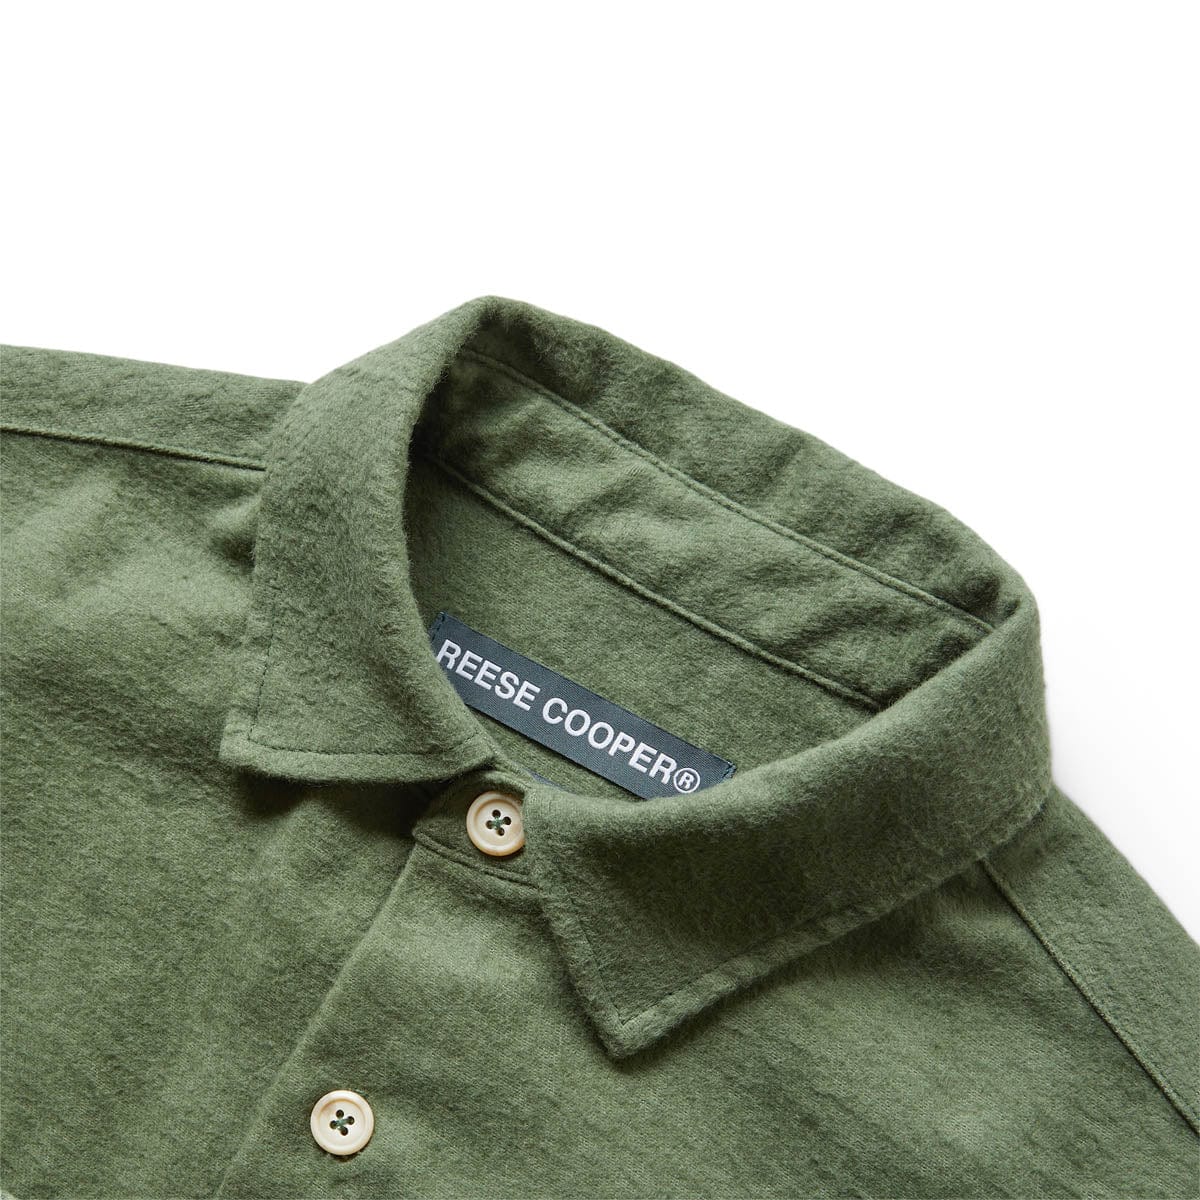 Reese Cooper FLANNEL BUTTON DOWN SHIRT SAGE